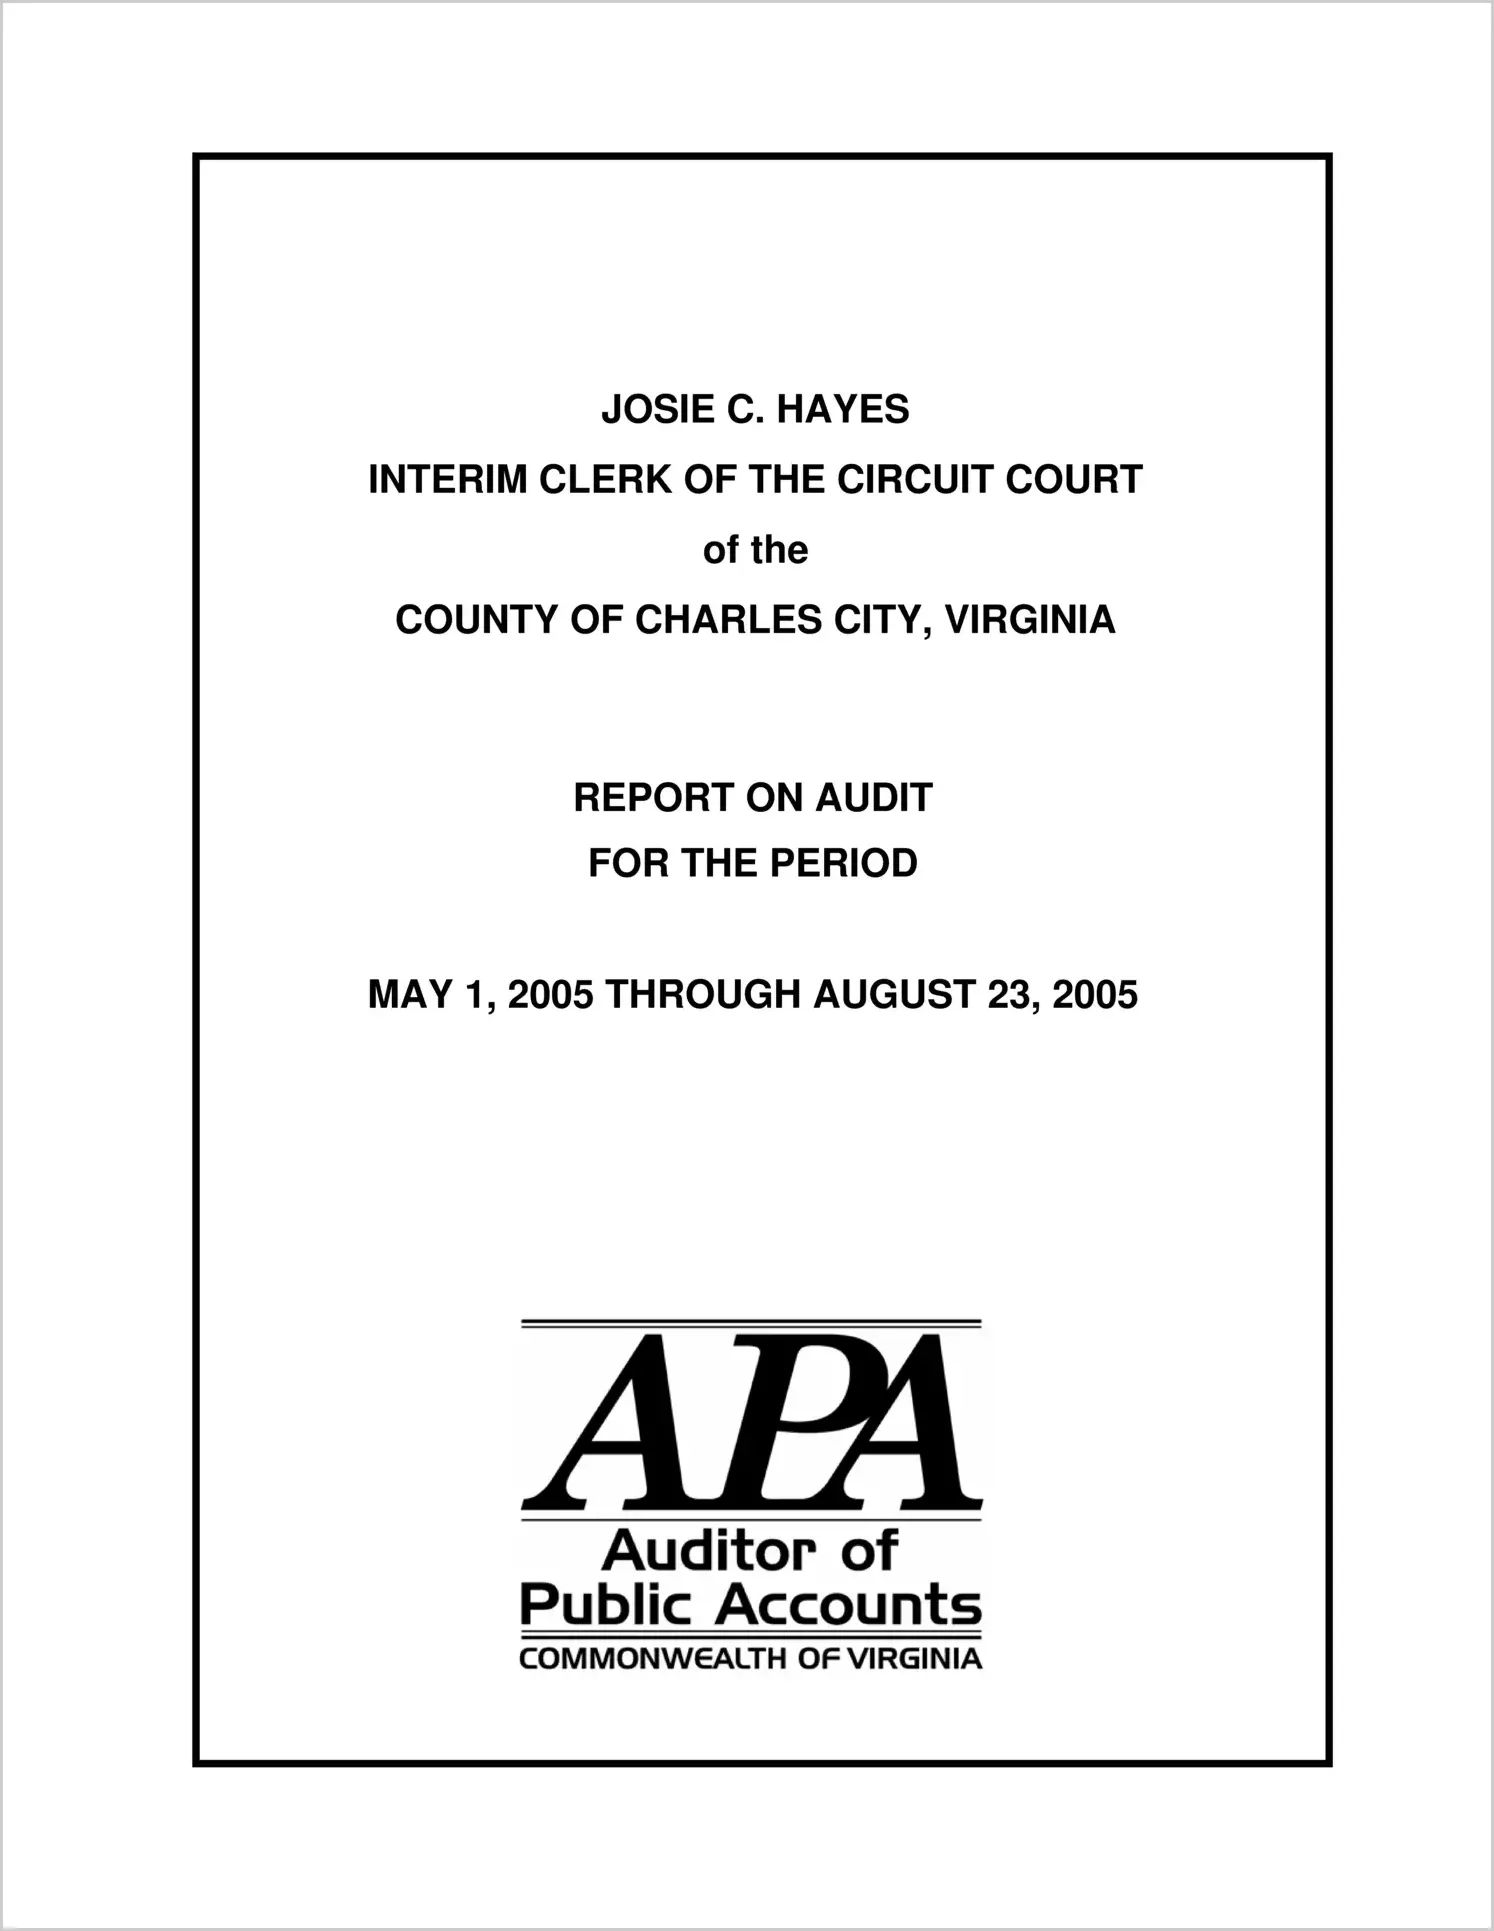 Statement of Assets and Liabilities of Josie C. Hayes, the former Interim Clerk of the Circuit Court of the County of Charles City for the period May 1, 2005 through August 23, 2005